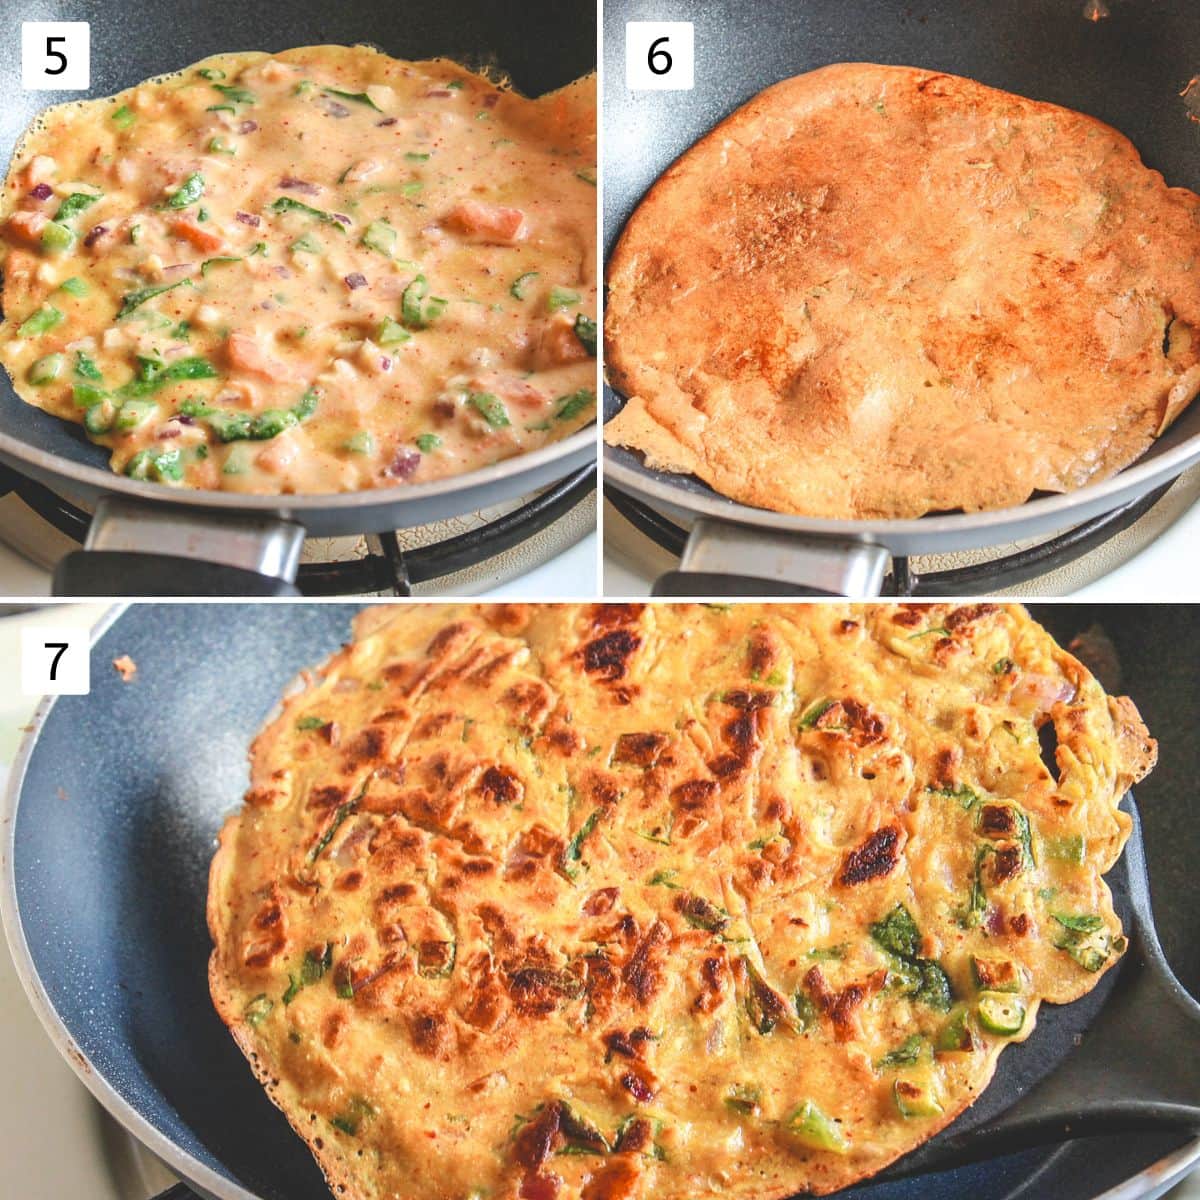 Collage of 3 images showing cooking besan cheela on the pan.